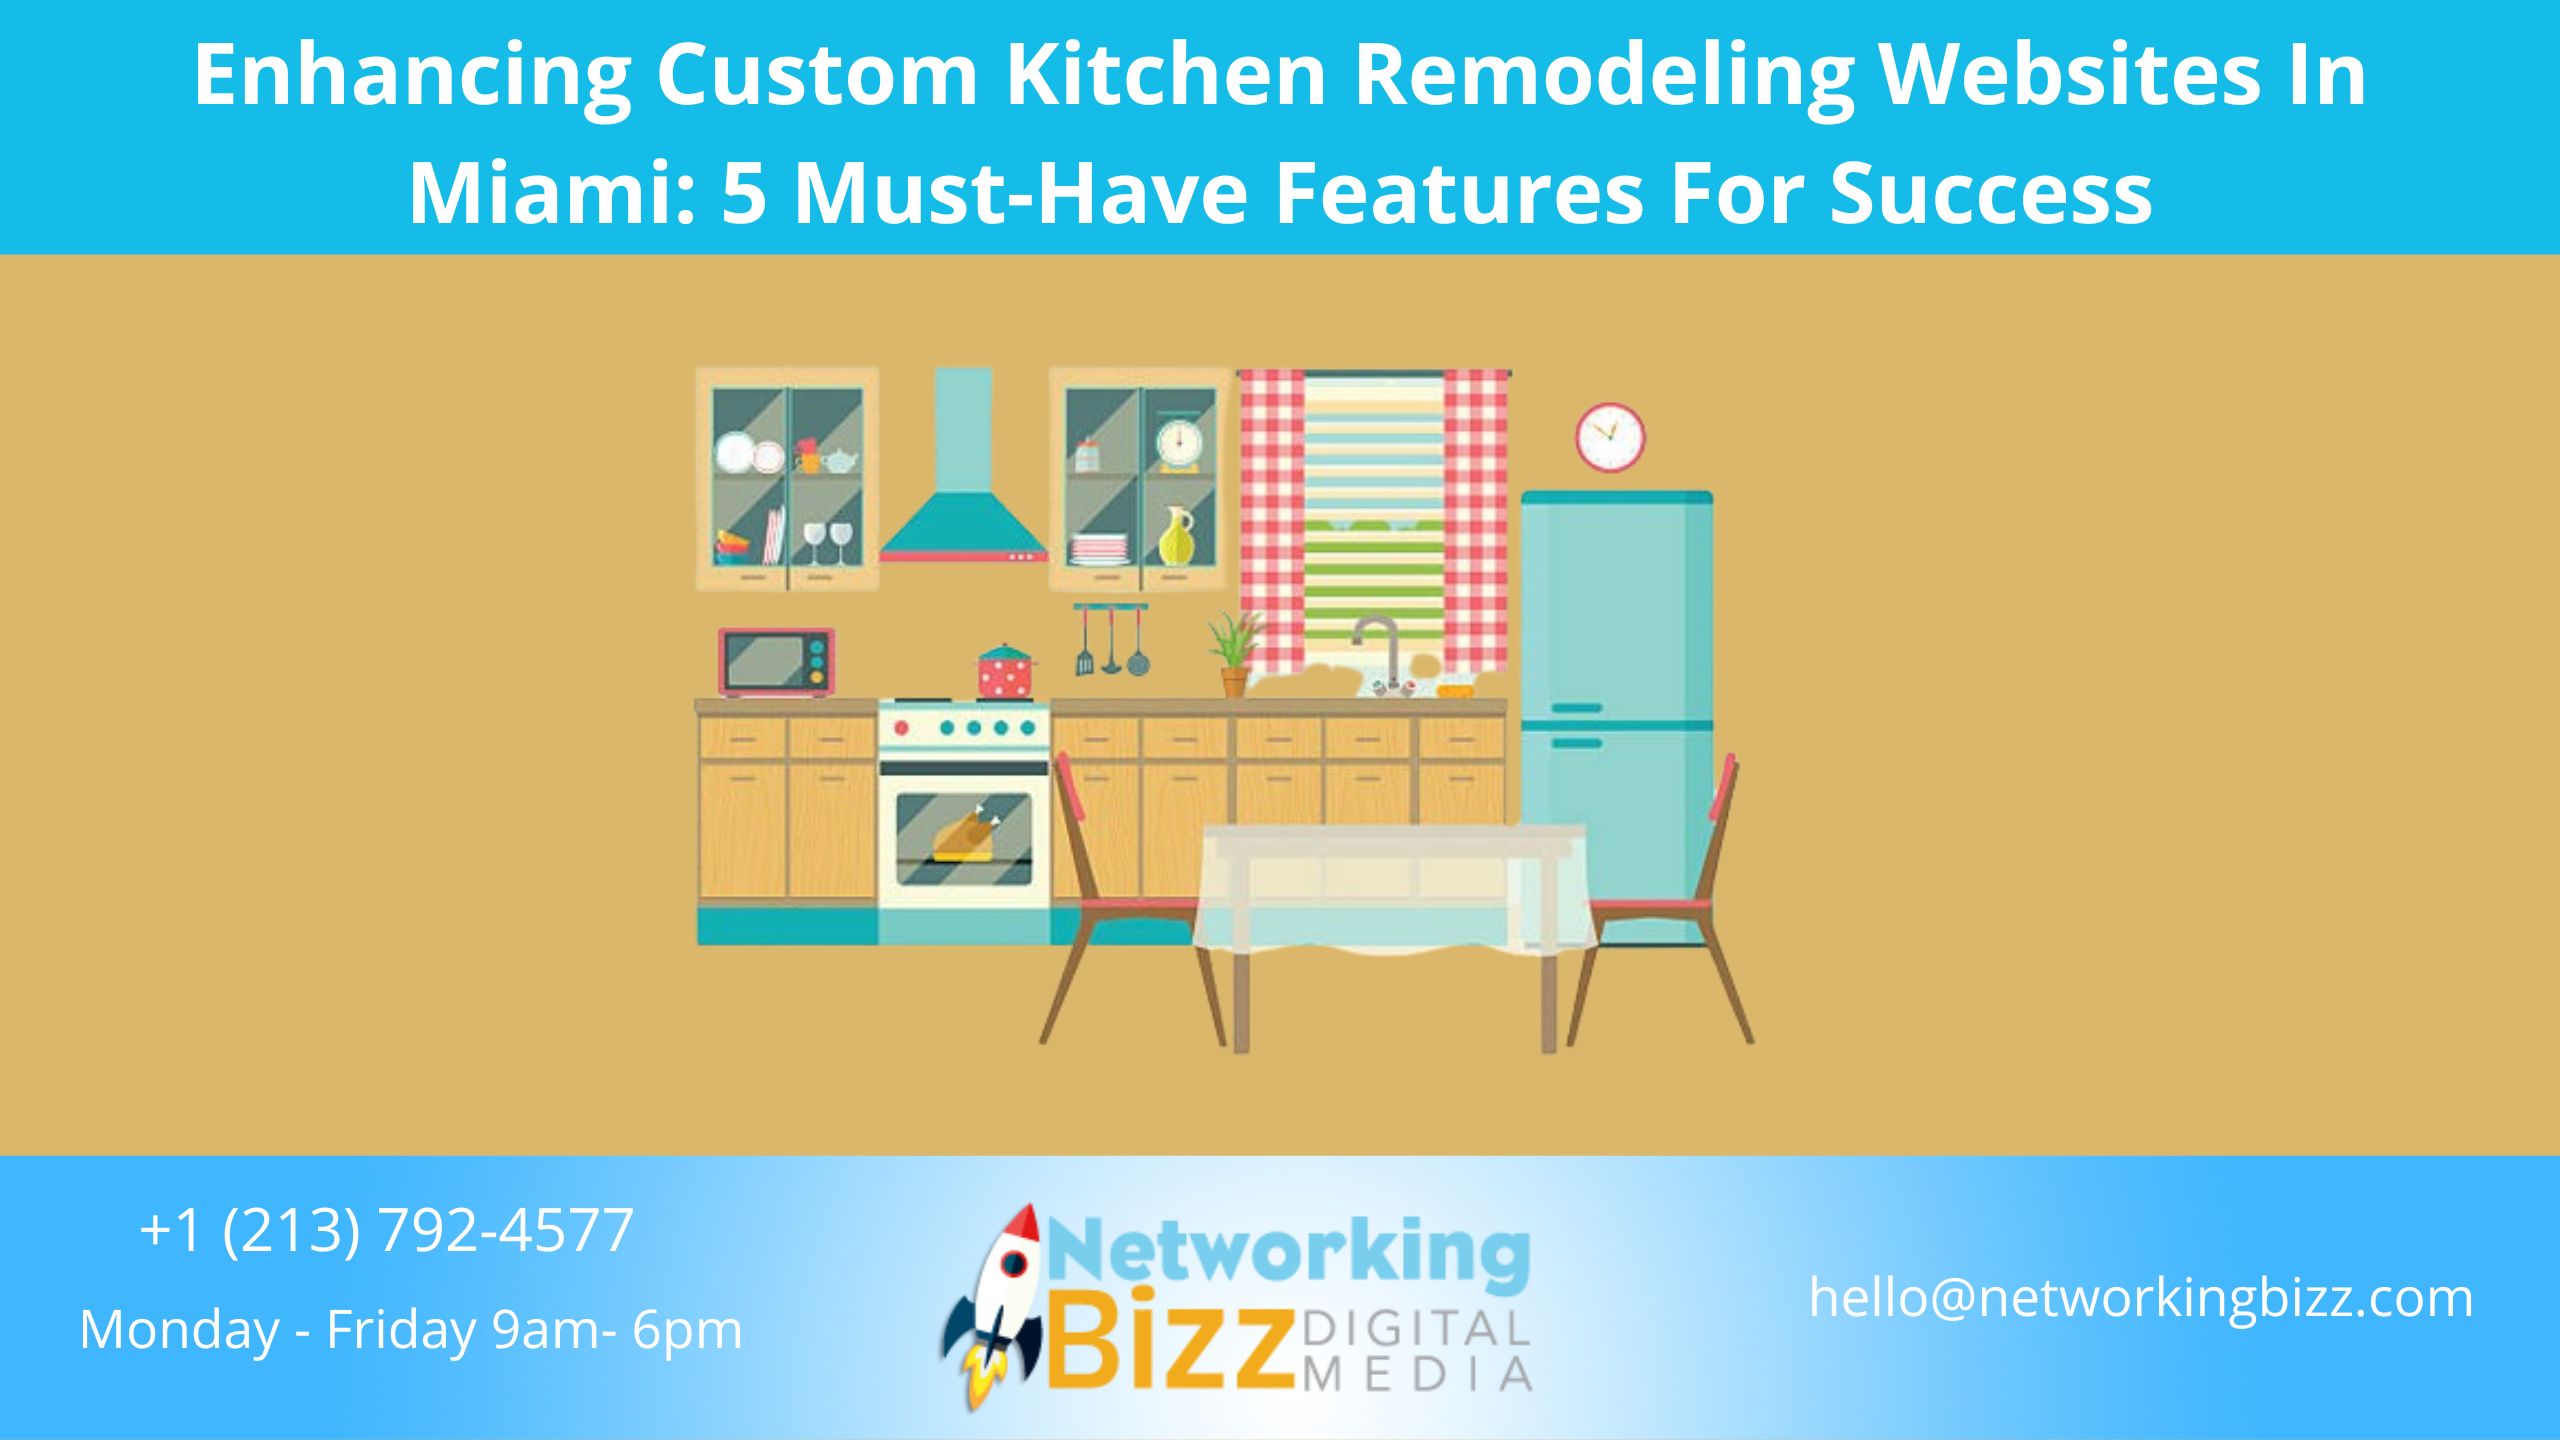 Enhancing Custom Kitchen Remodeling Websites In Miami: 5 Must-Have Features For Success